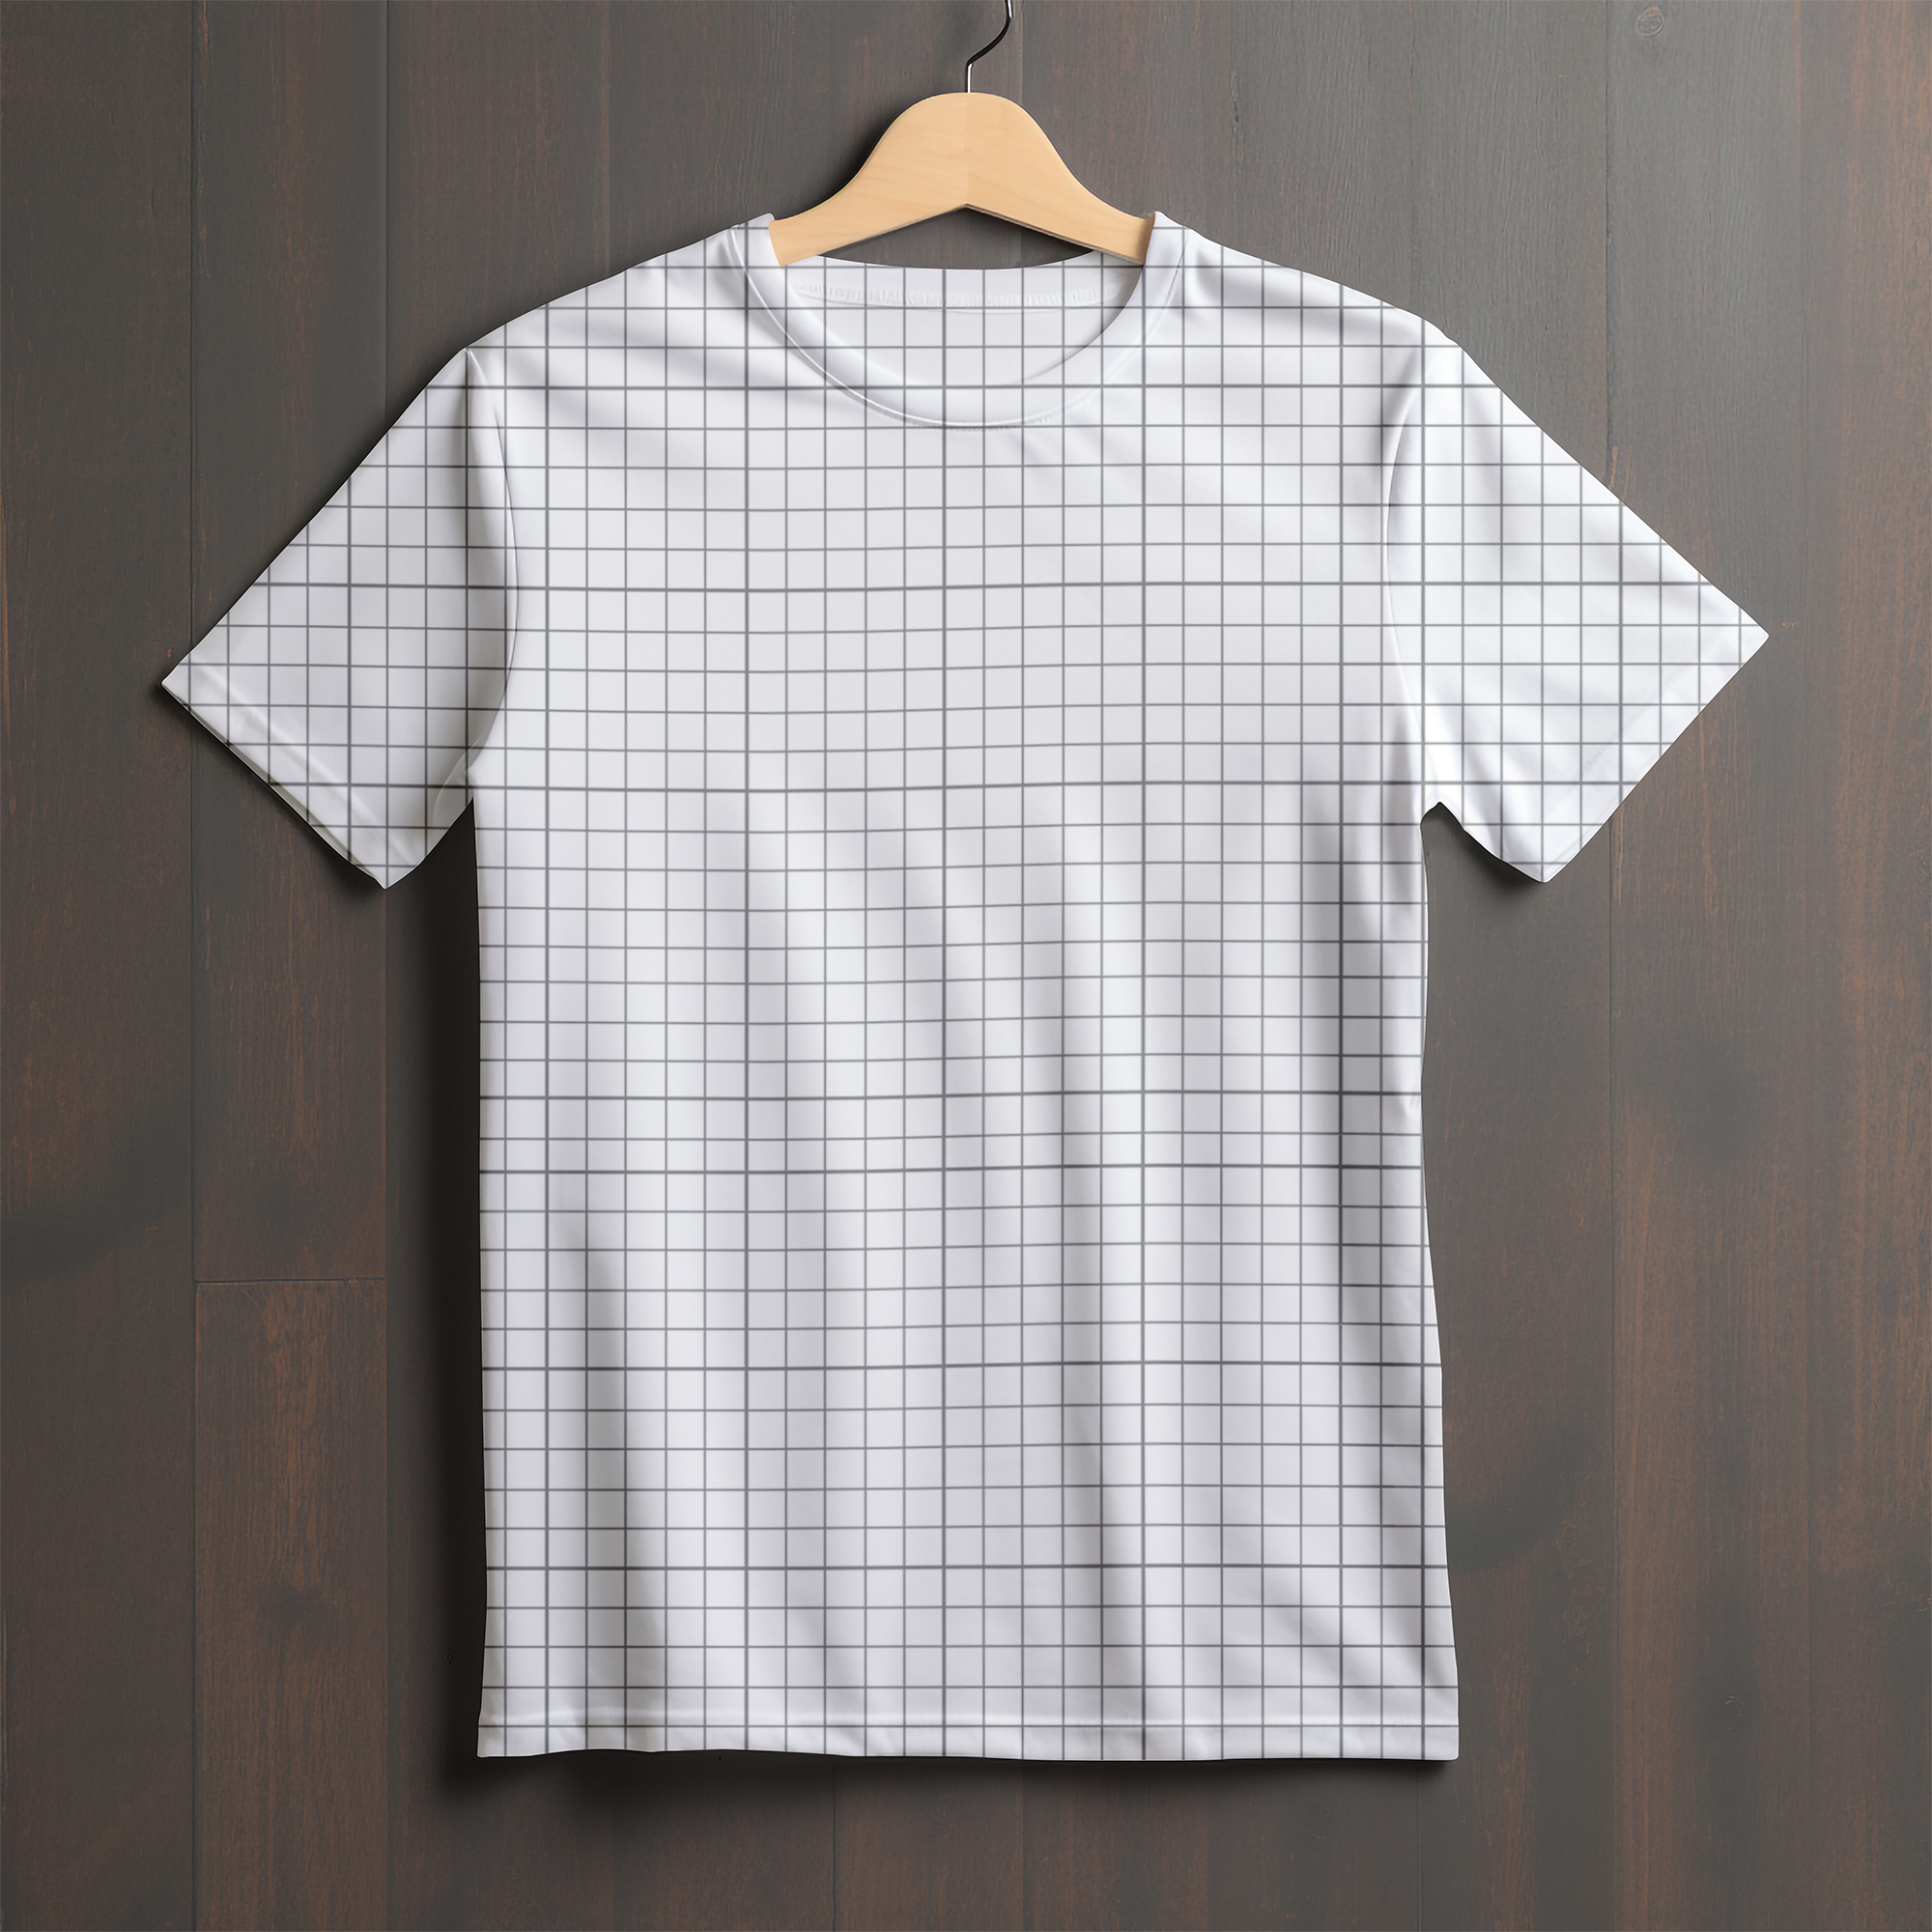 Free Download Ultra hd t-shirt mockup with wooden background grid